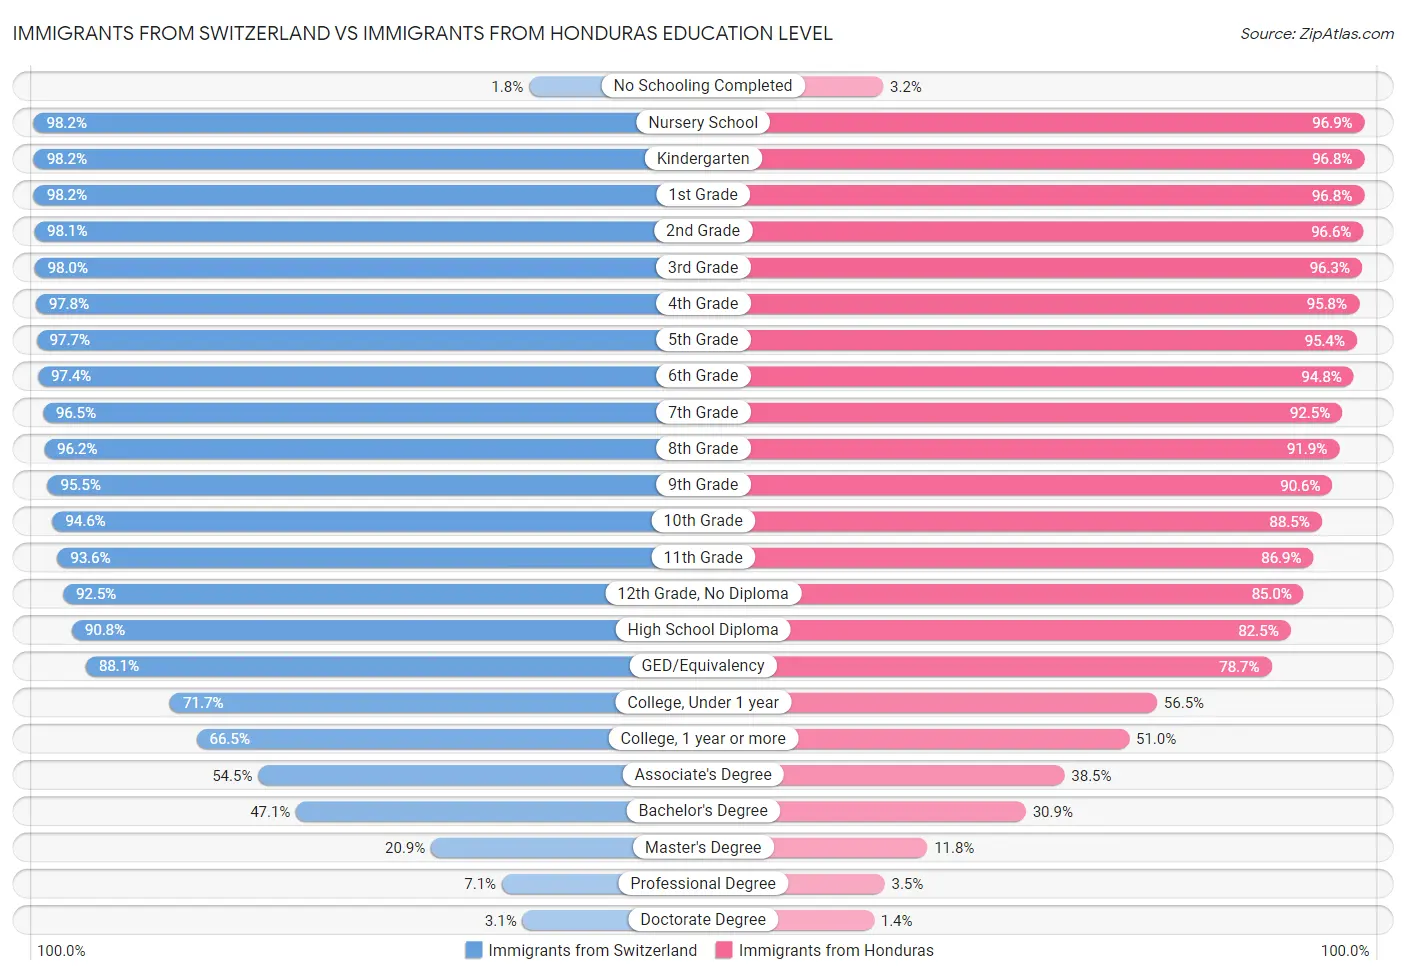 Immigrants from Switzerland vs Immigrants from Honduras Education Level